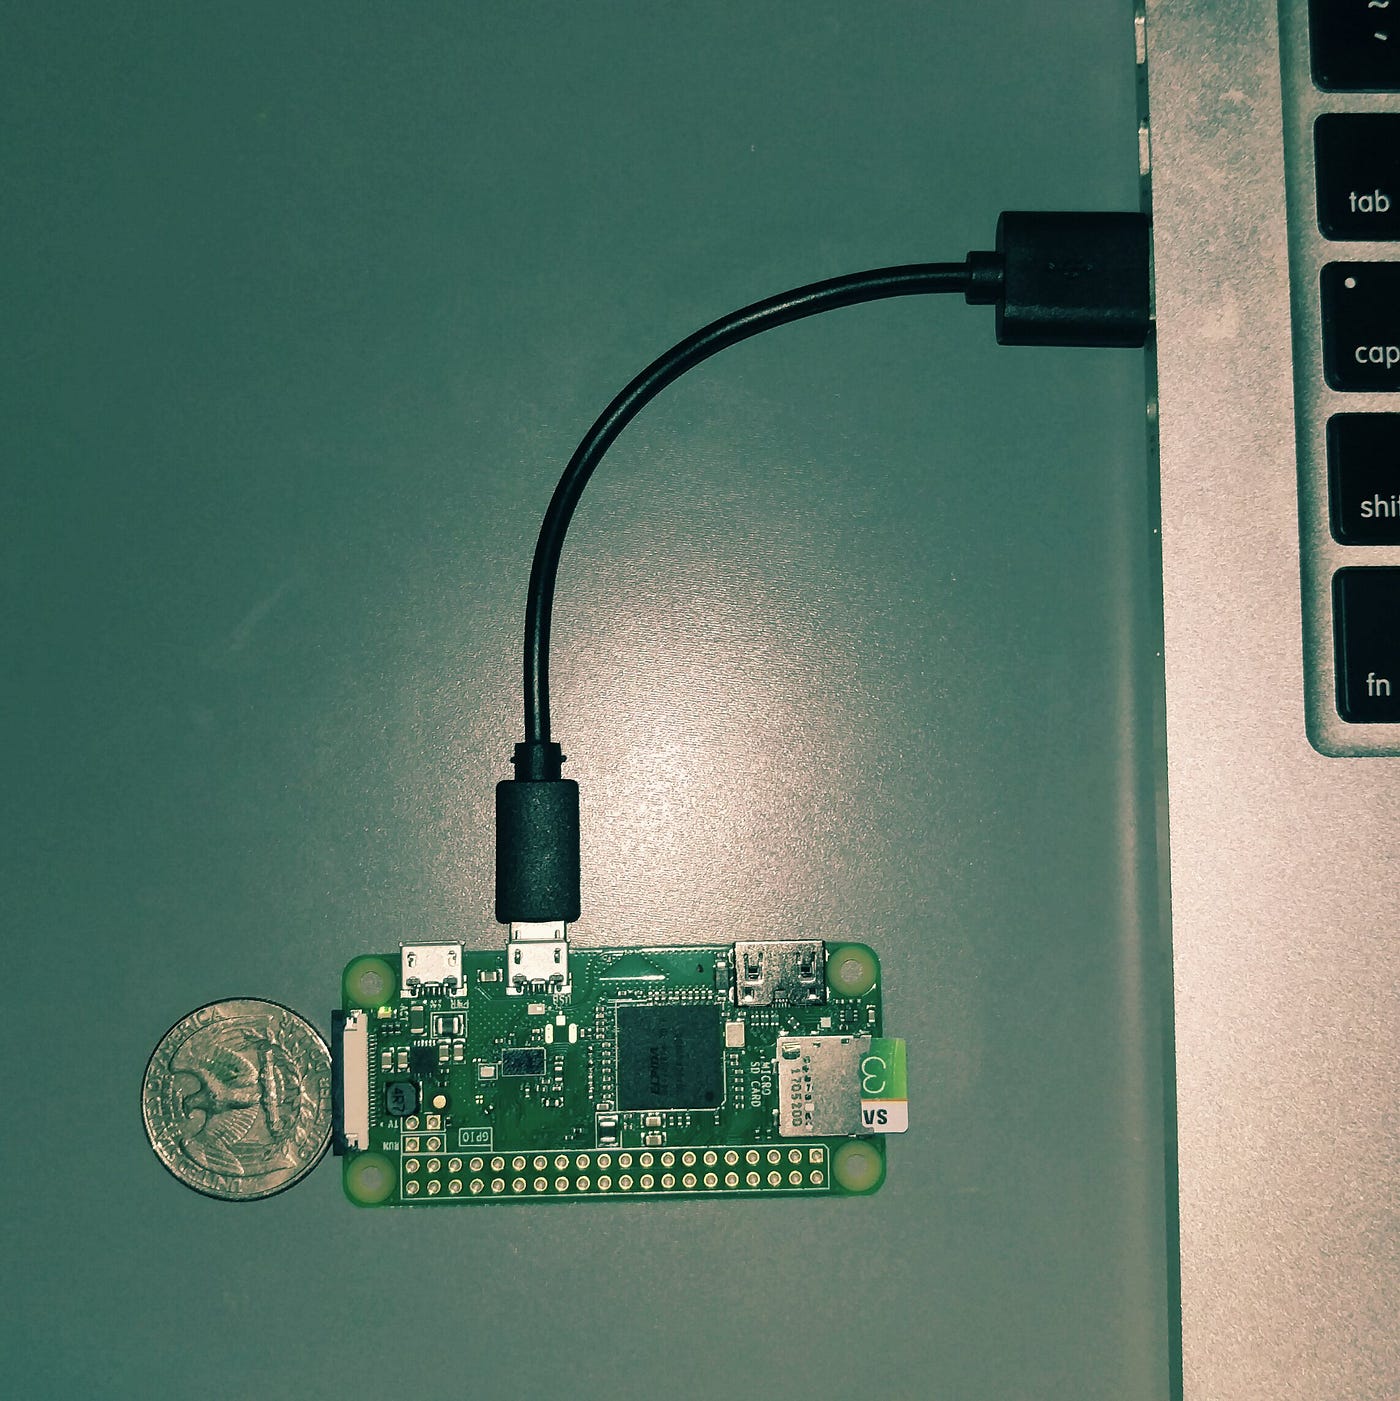 Build a Pi Zero from a USB port. In 2017, many technological advancement… |  by Victor Benarbia | Medium